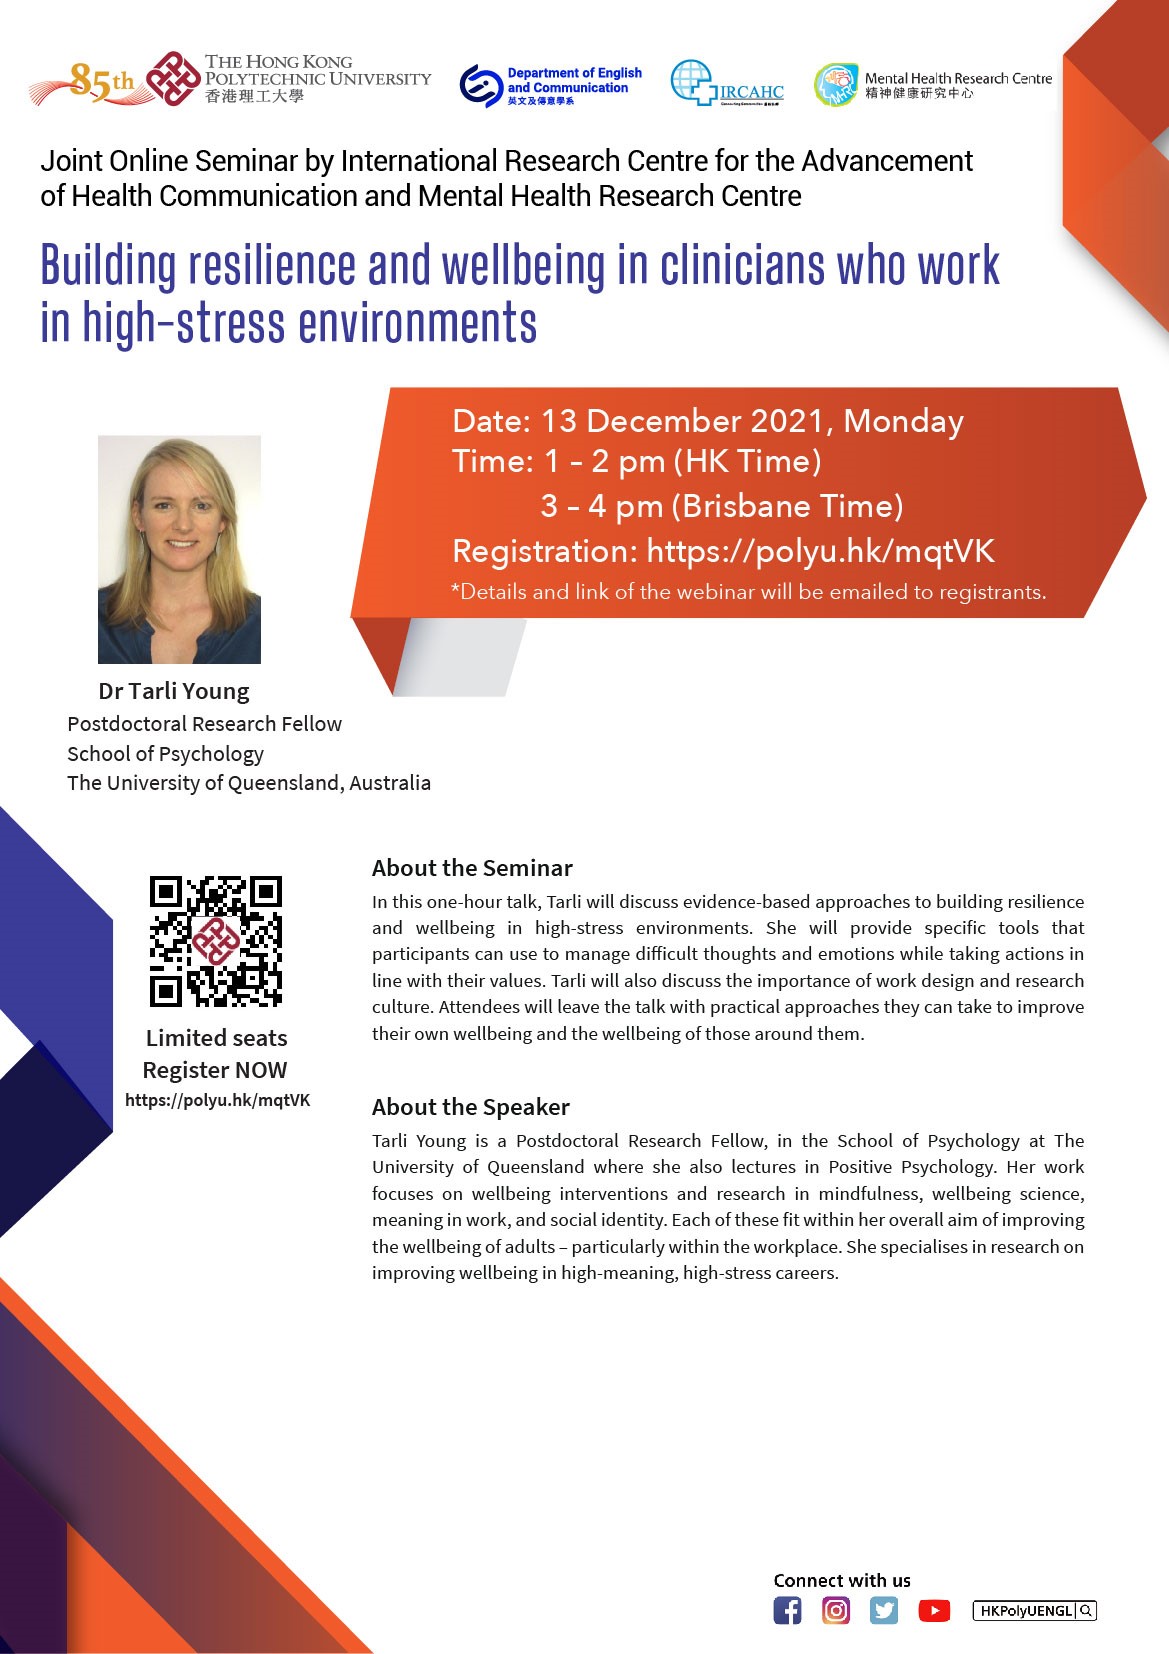 Building resilience and wellbeing in clinicians who work in high-stress environments poster